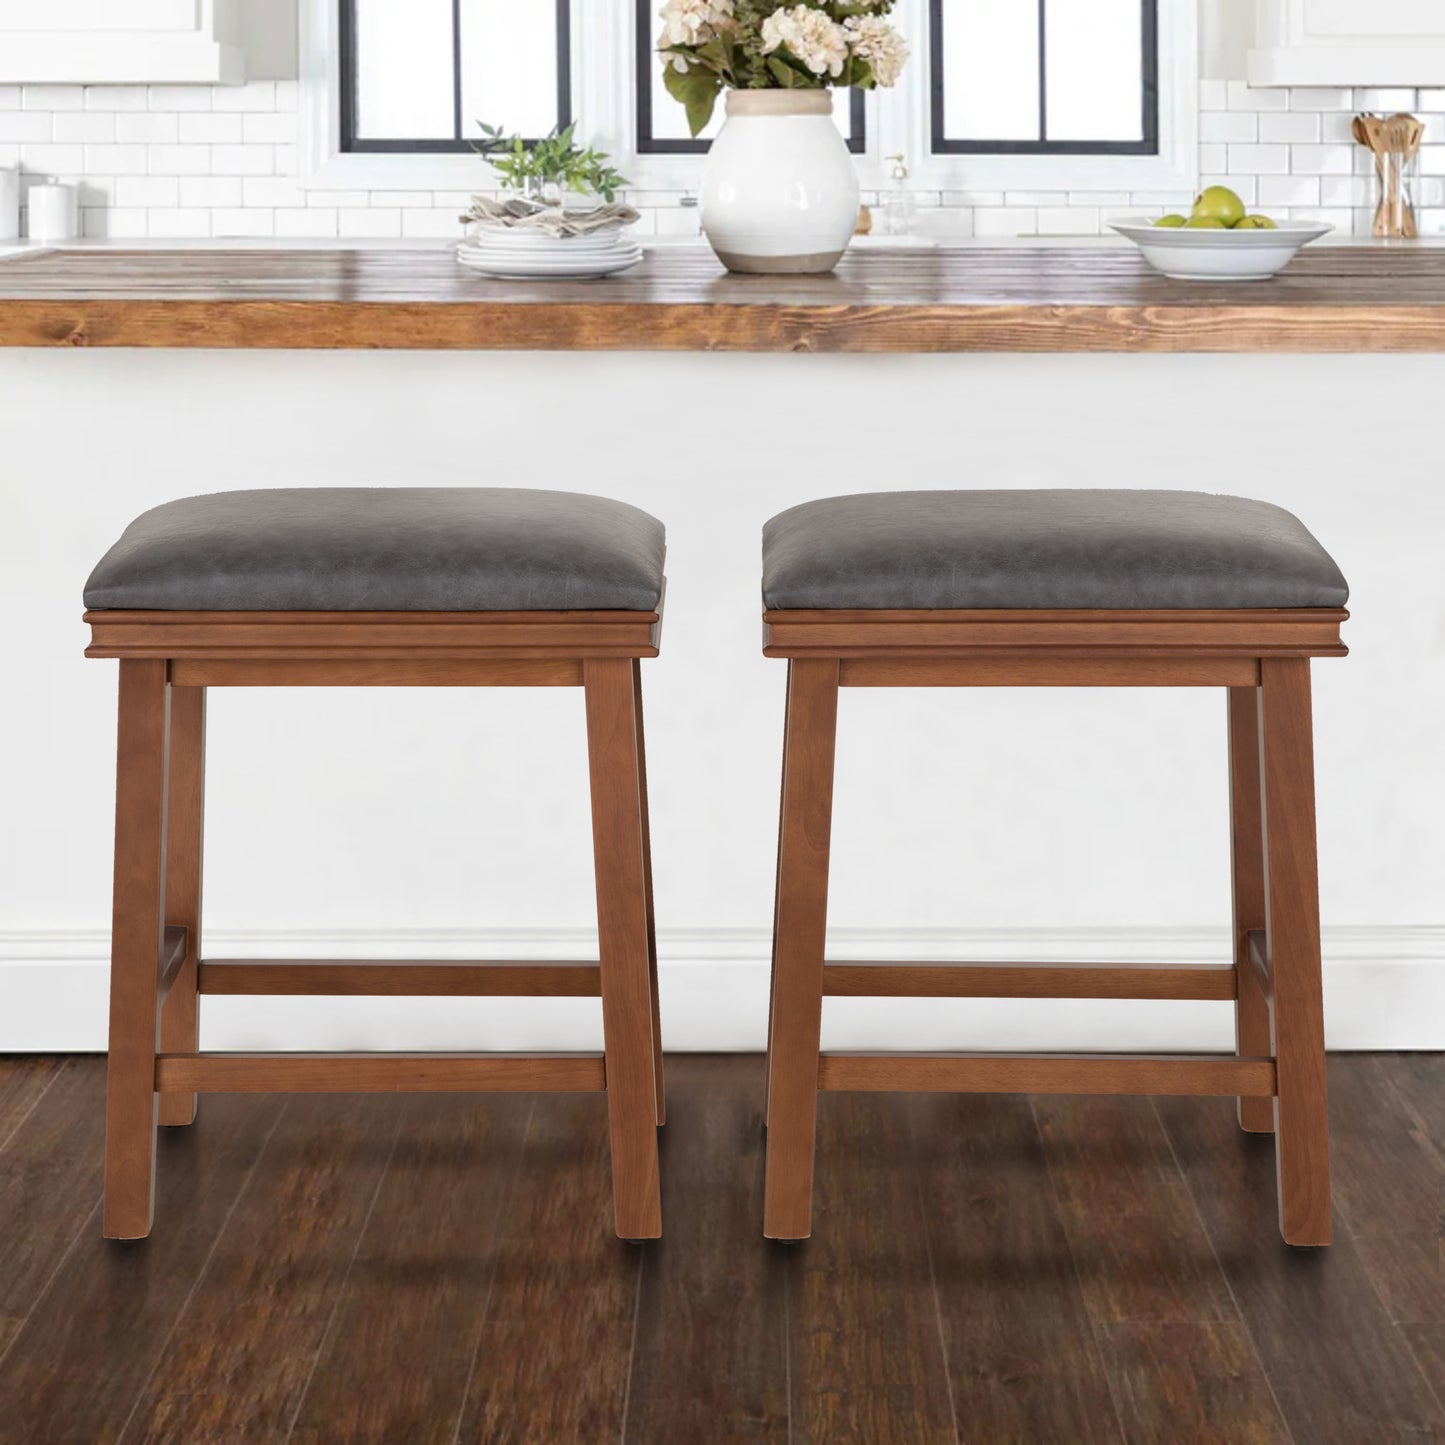 Sophia & William 24" PU Leather Counter Height Bar Stool with Wood Leg-Set of 2-Gray